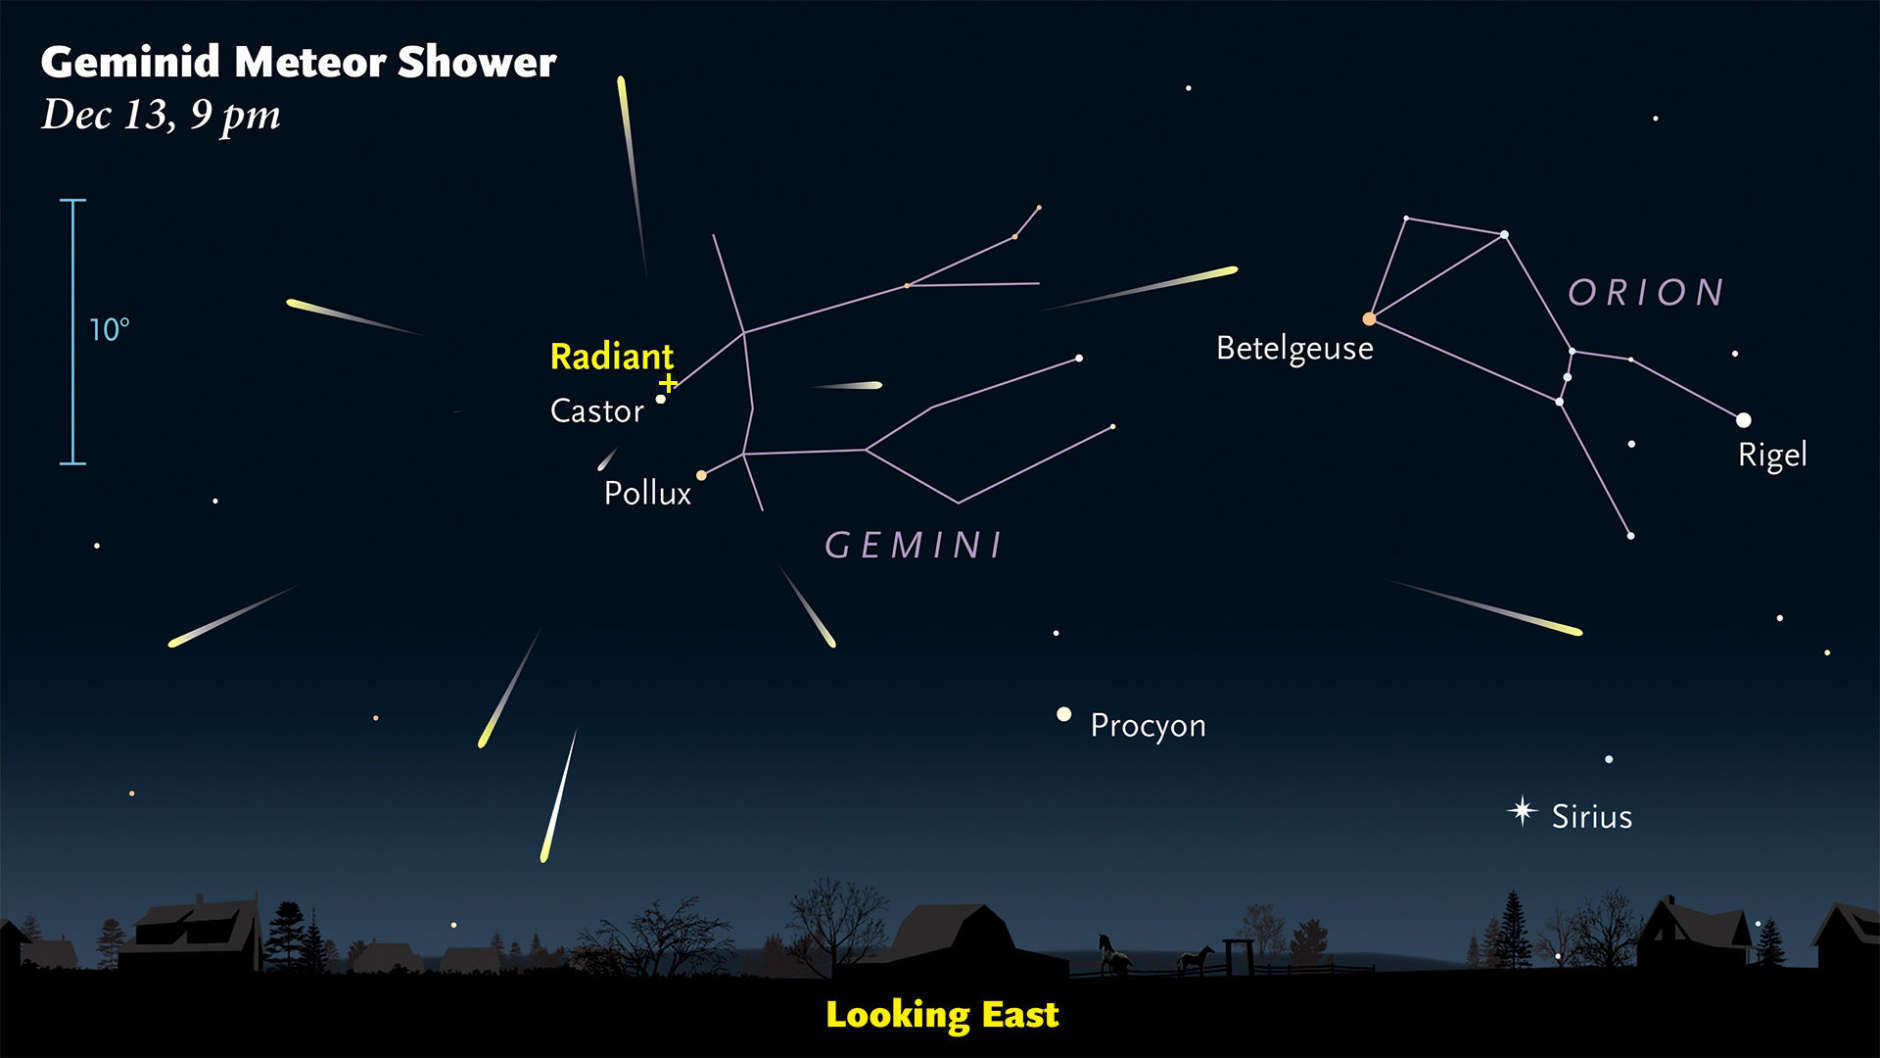 This should be a good year for the Geminids. There’s almost no moonlight to interfere with observing, and the shower reliably produces a high meteor count. Start looking for them about 2 hours after sunset. (Courtesy Sky & Telescope/Gregg Dindermann)